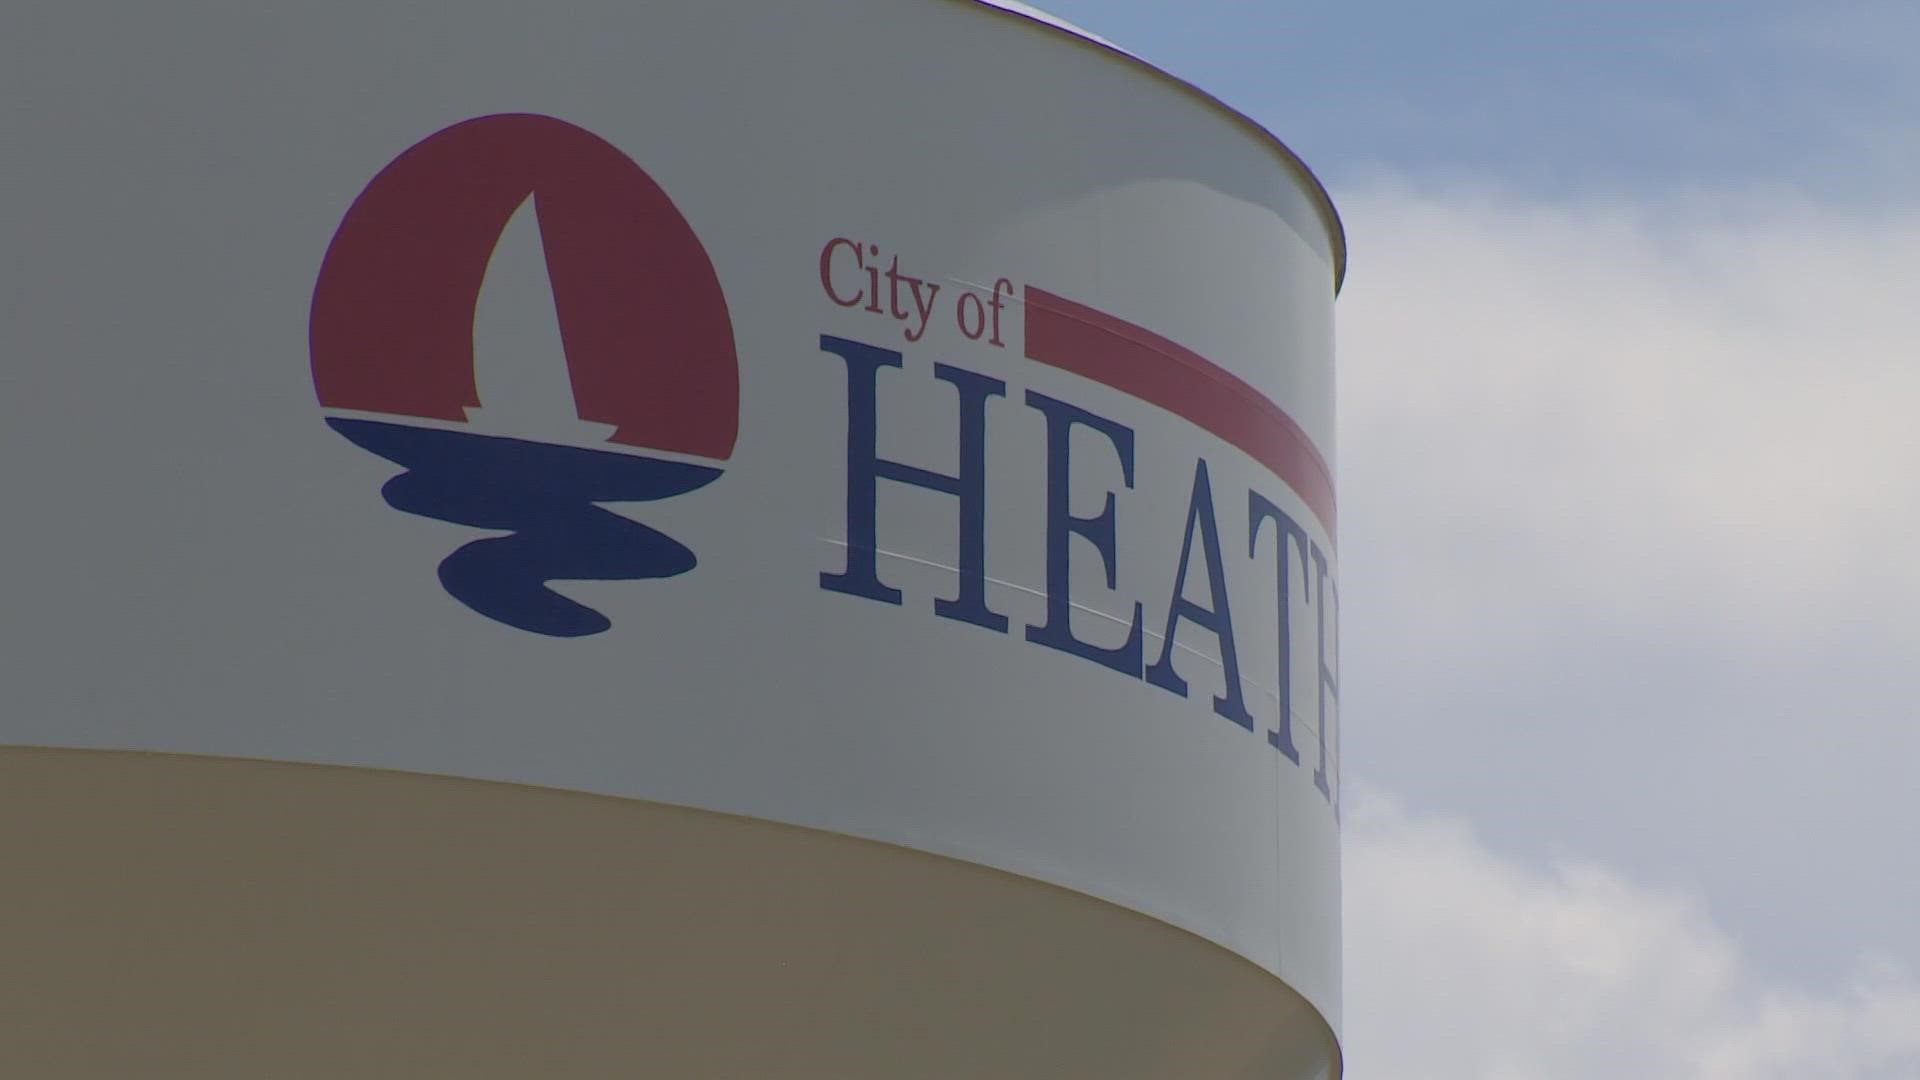 Residents in the Rockwall County communities of Heath and McClendon-Chisolm face water disruptions if storage tanks can't meet summer drought demand.